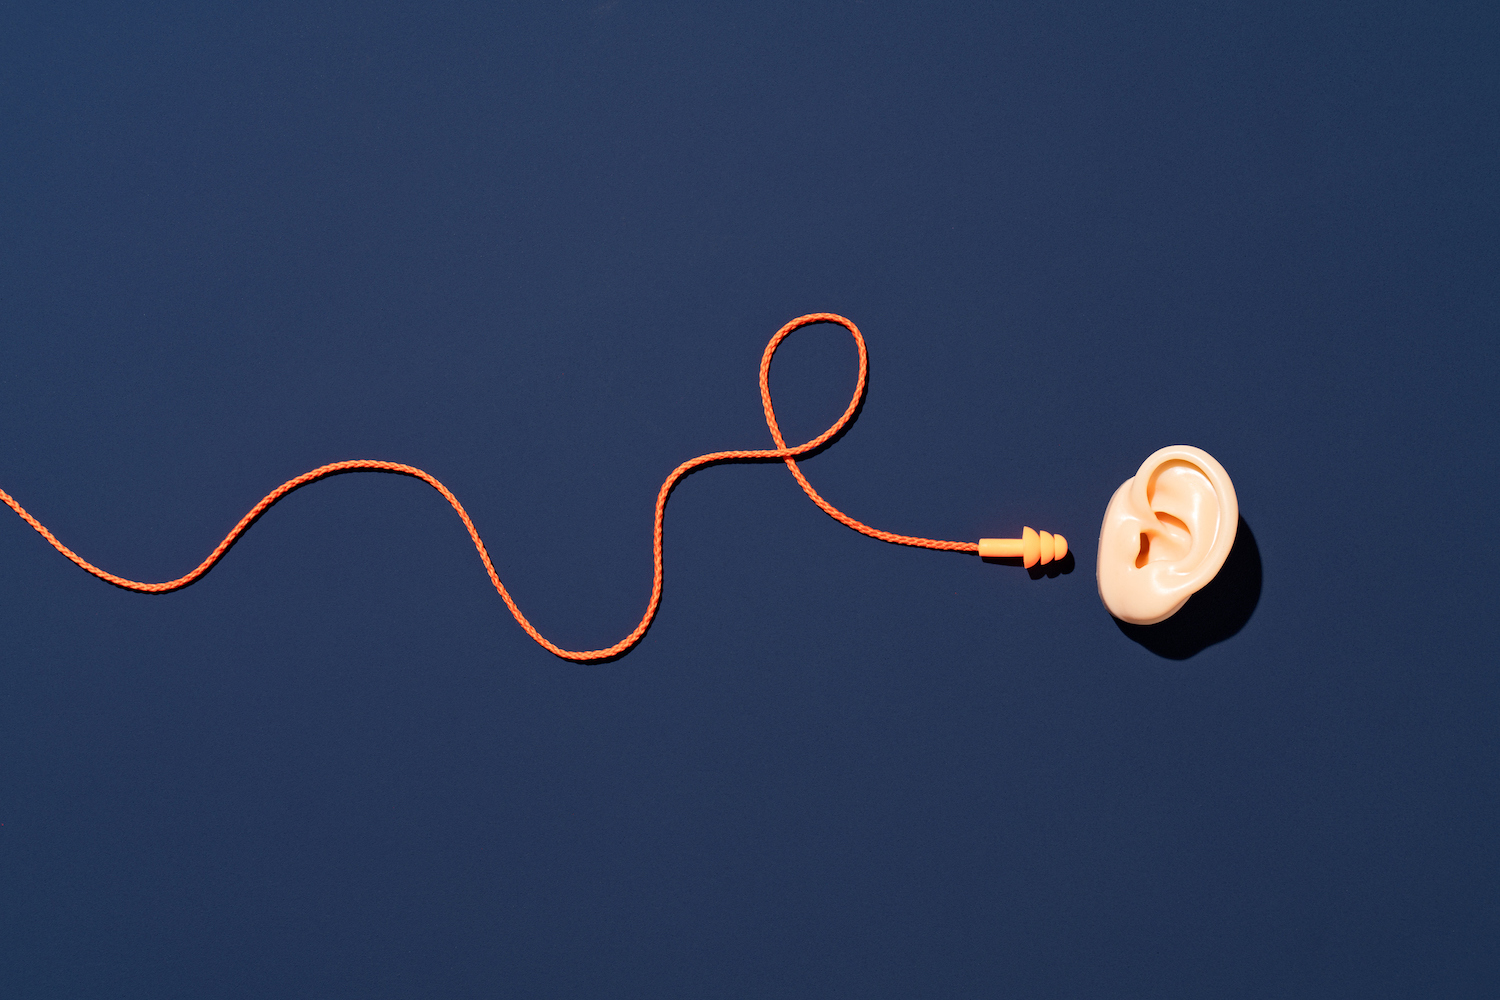 Orange earplugs with a twisted string reach the ear directly above the view on a blue background.  4 Tips for RevOps Teams to Filter the Noise and Focus on the Big Picture